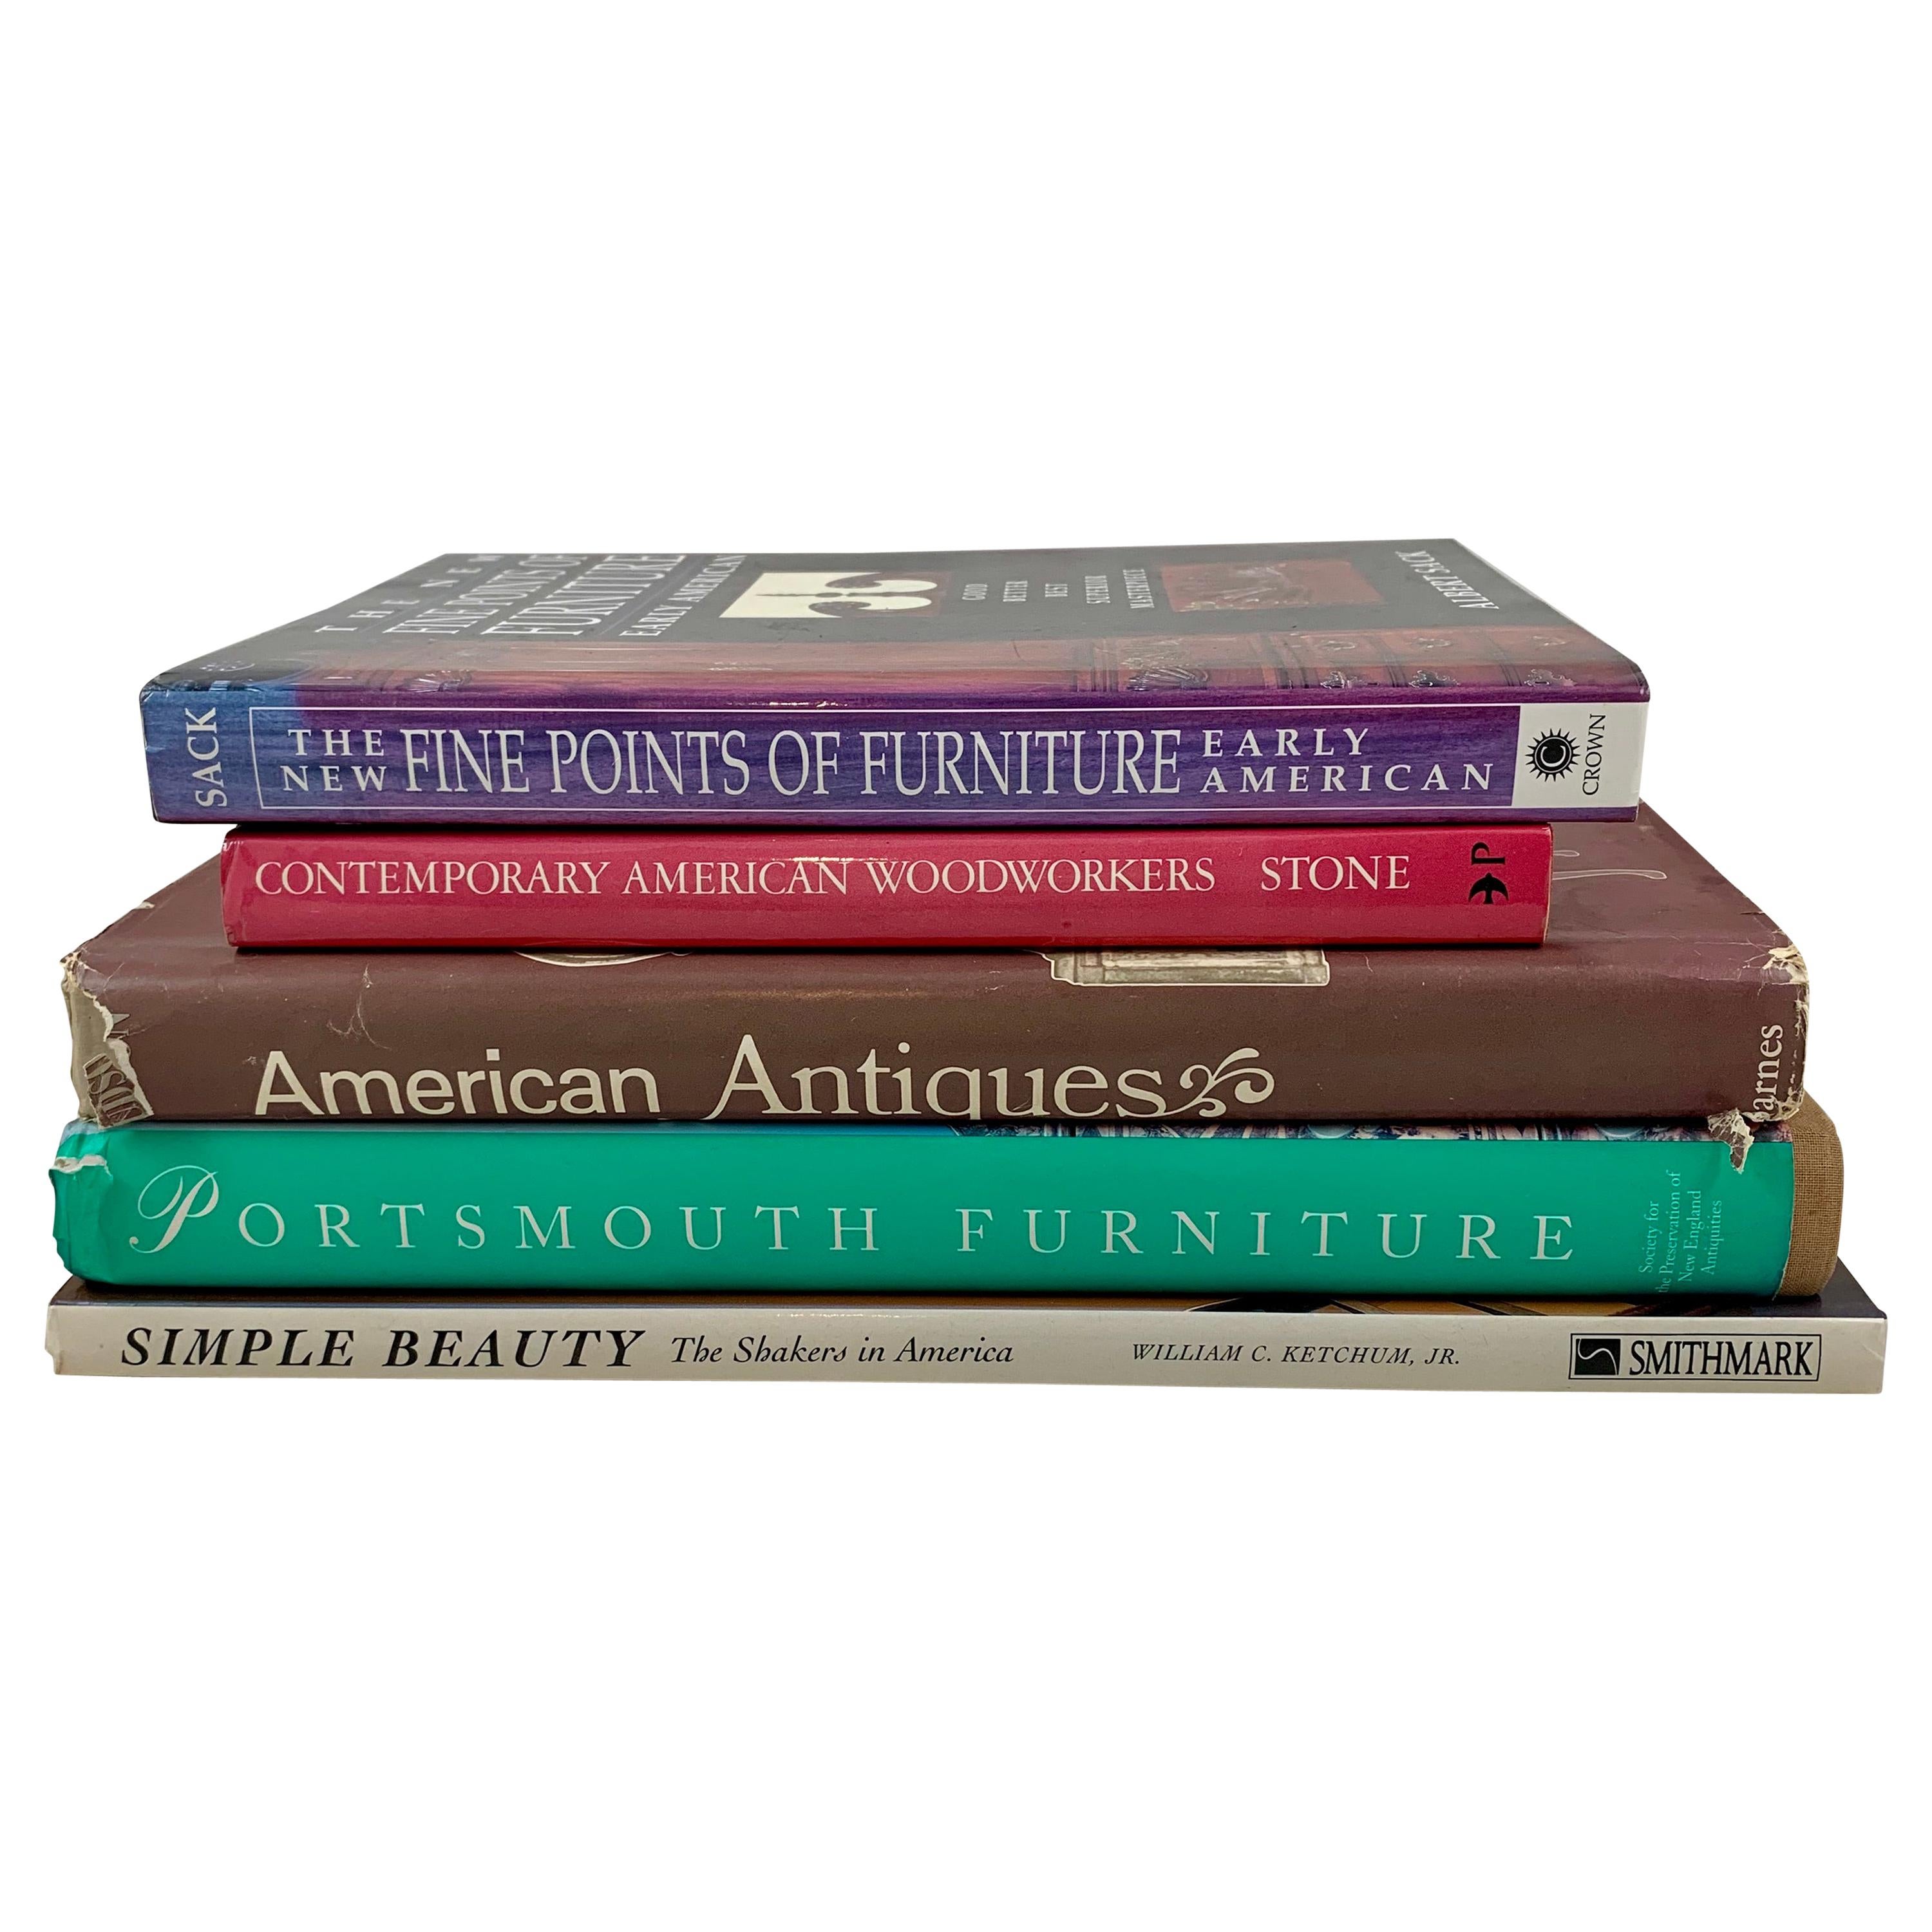 Furniture Reference Books, Shaker, Early American, Contemporary Collection of 5